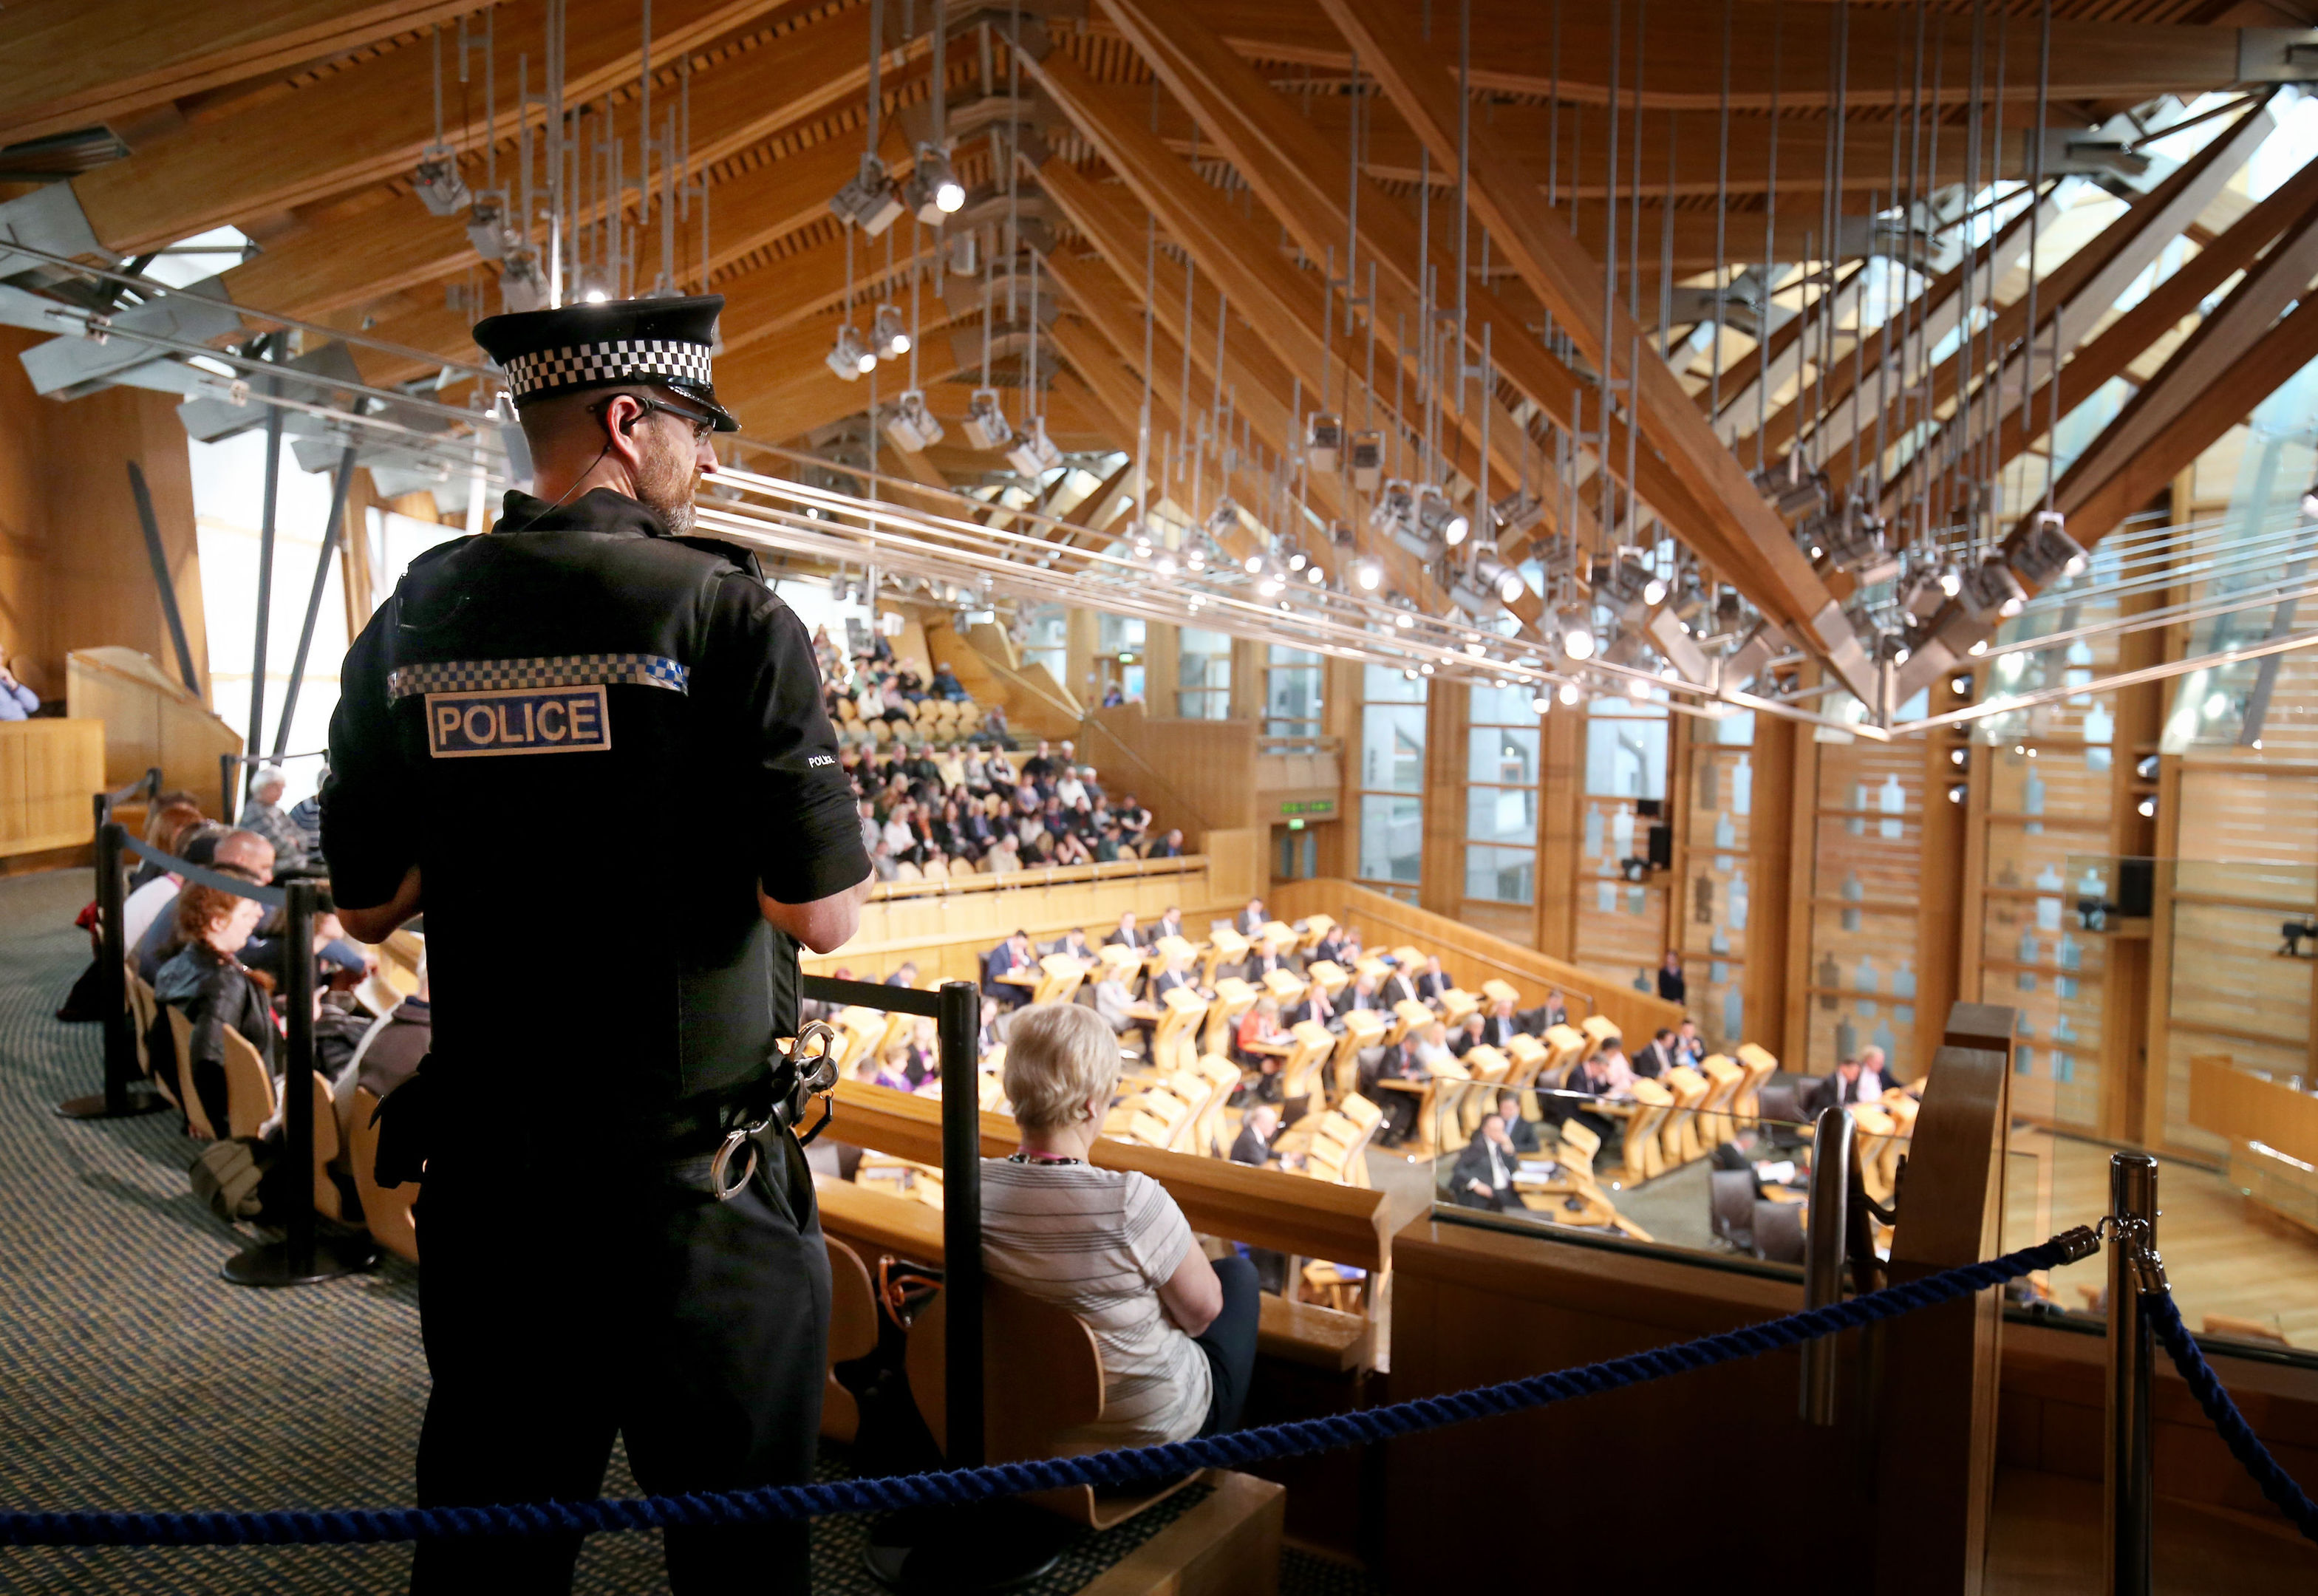 Police presence in the main chamber at the Scottish Parliament in Edinburgh, on the  second day of the debate on a potential second Scottish independence referendum.